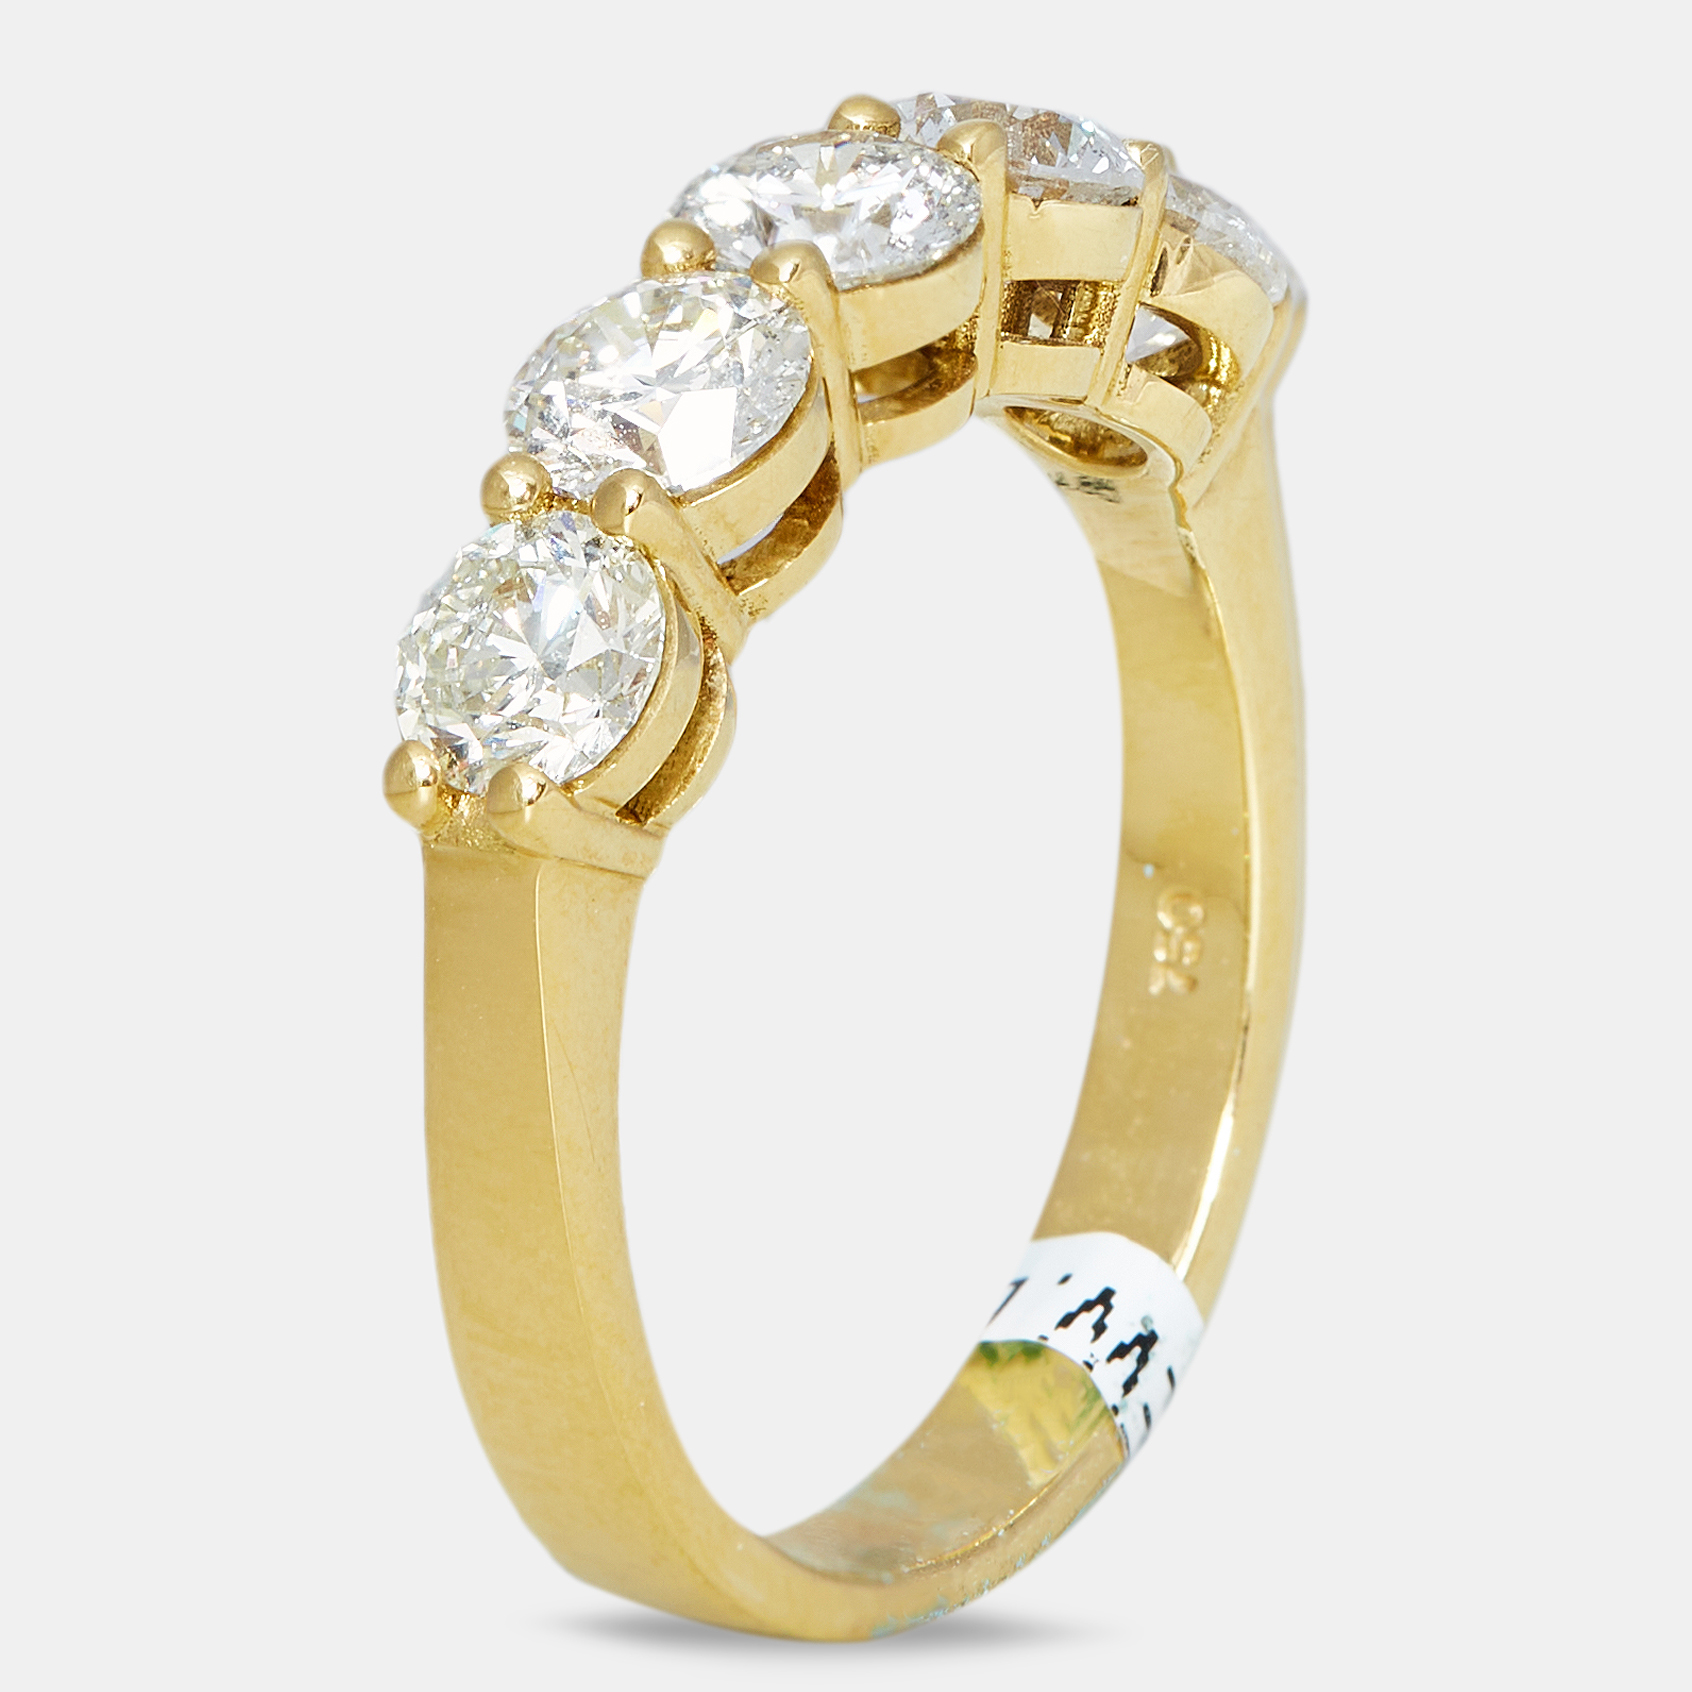 Carefully crafted using 18k yellow gold this diamond ring is sure to remain a beautiful investment. It has high allure and an elegant fit.